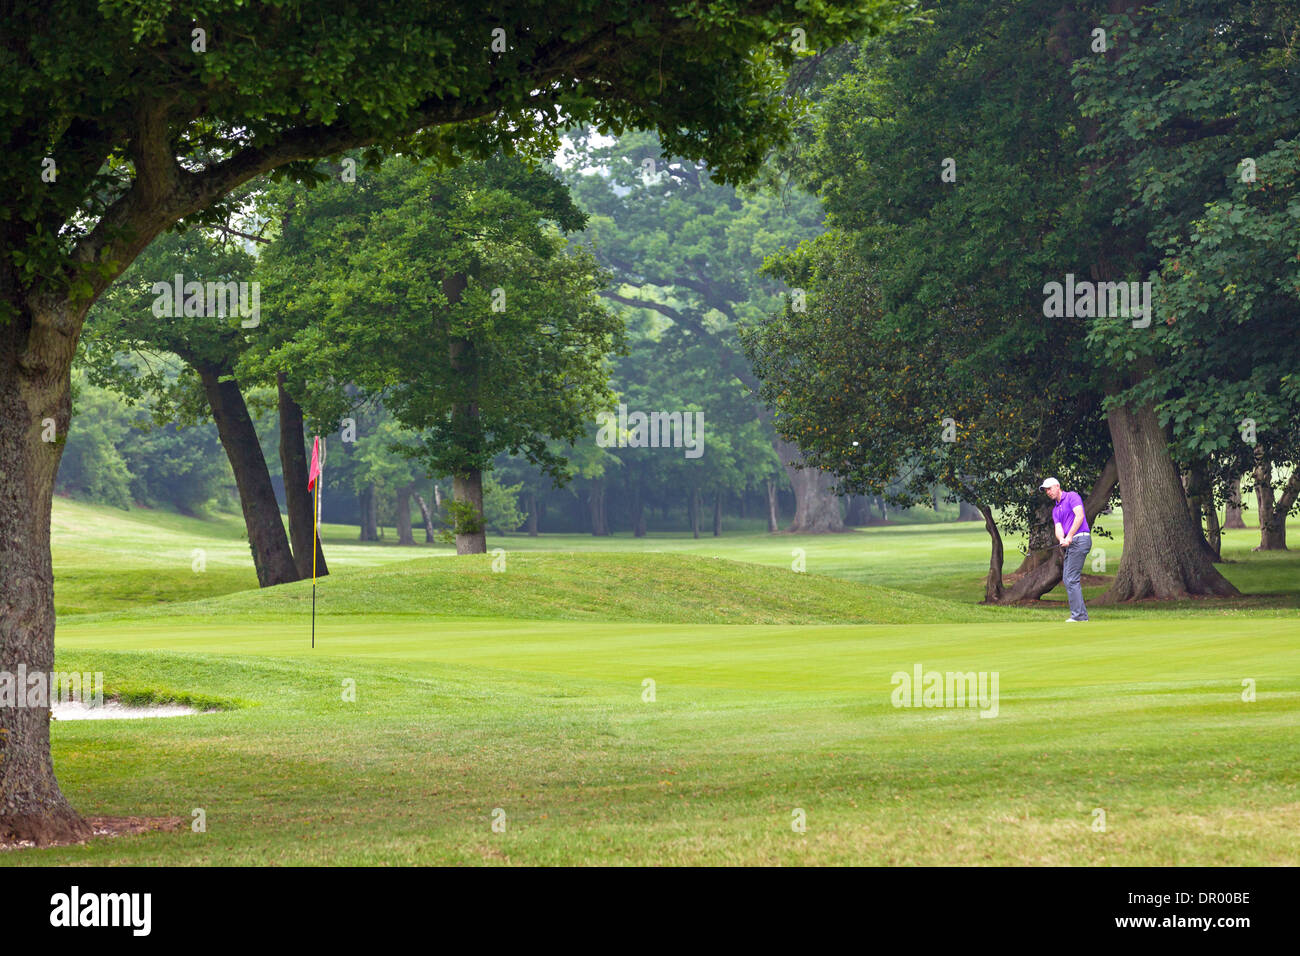 Golfer chipping onto the putting green with the ball in mid air. Stock Photo